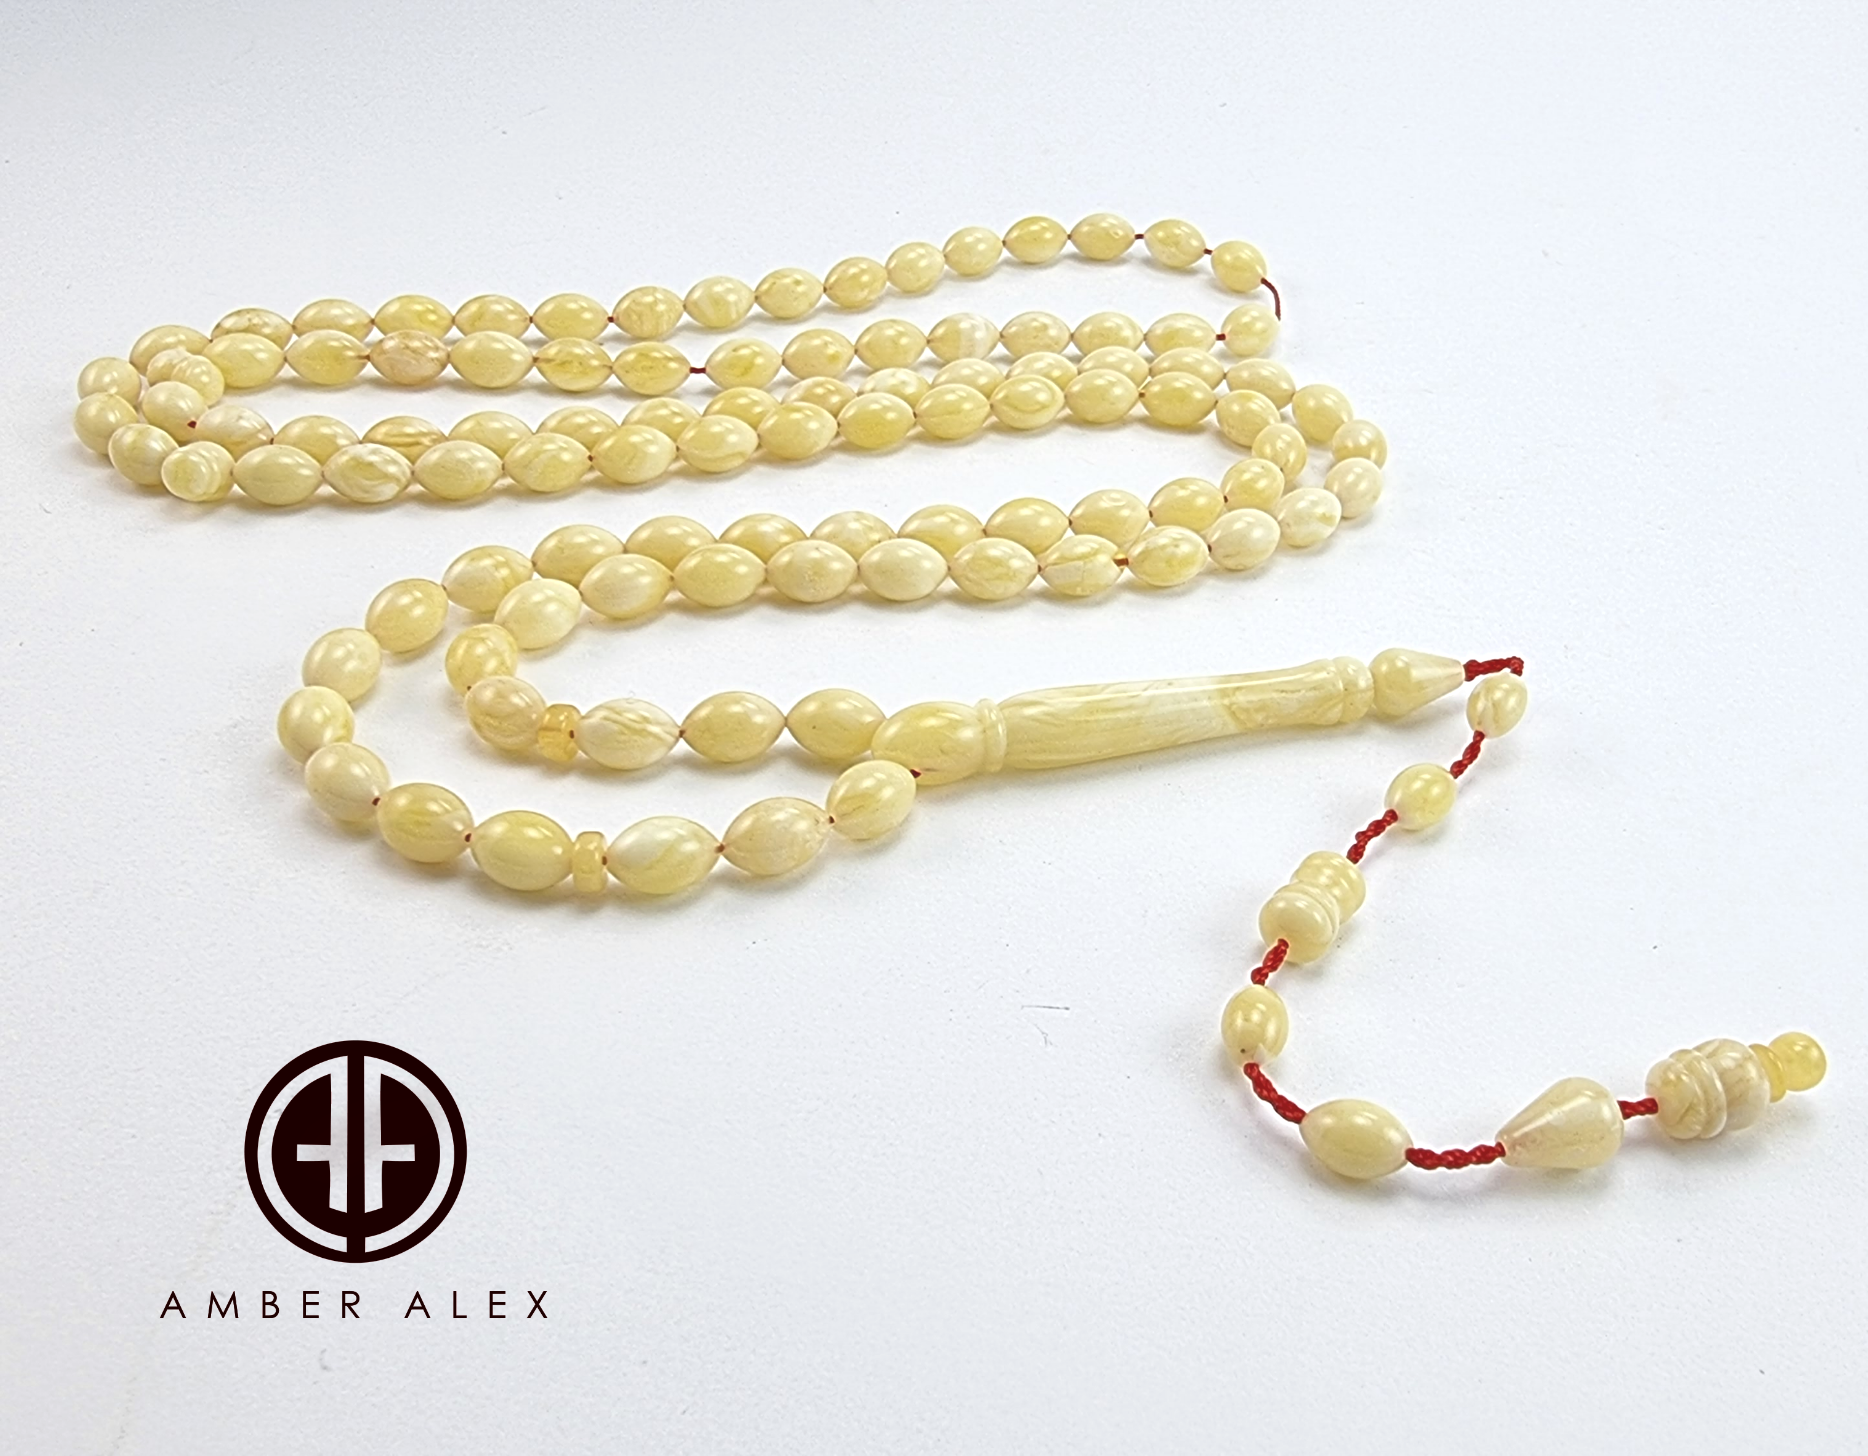 White With Yellow Amber Olive Shape 6.5 mm Islamic Rosary Beads